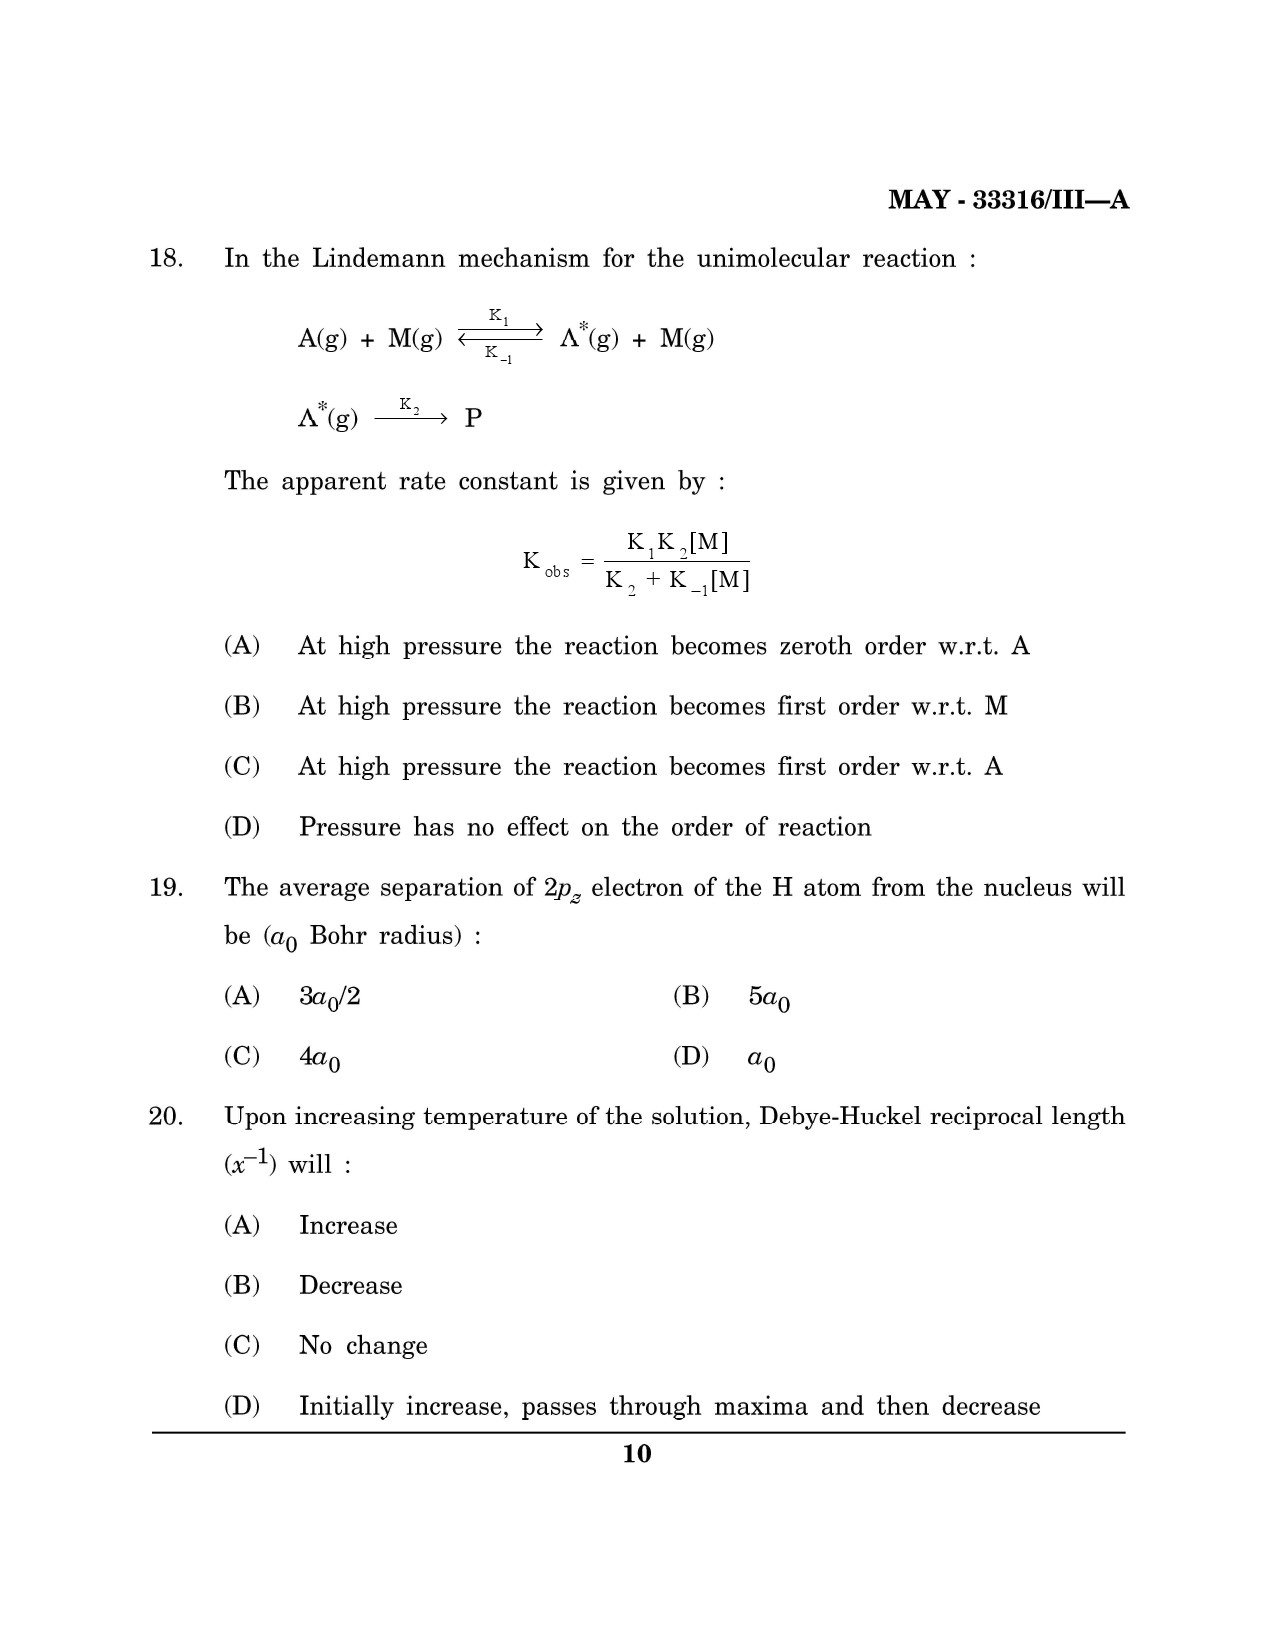 Maharashtra SET Chemical Sciences Question Paper III May 2016 9